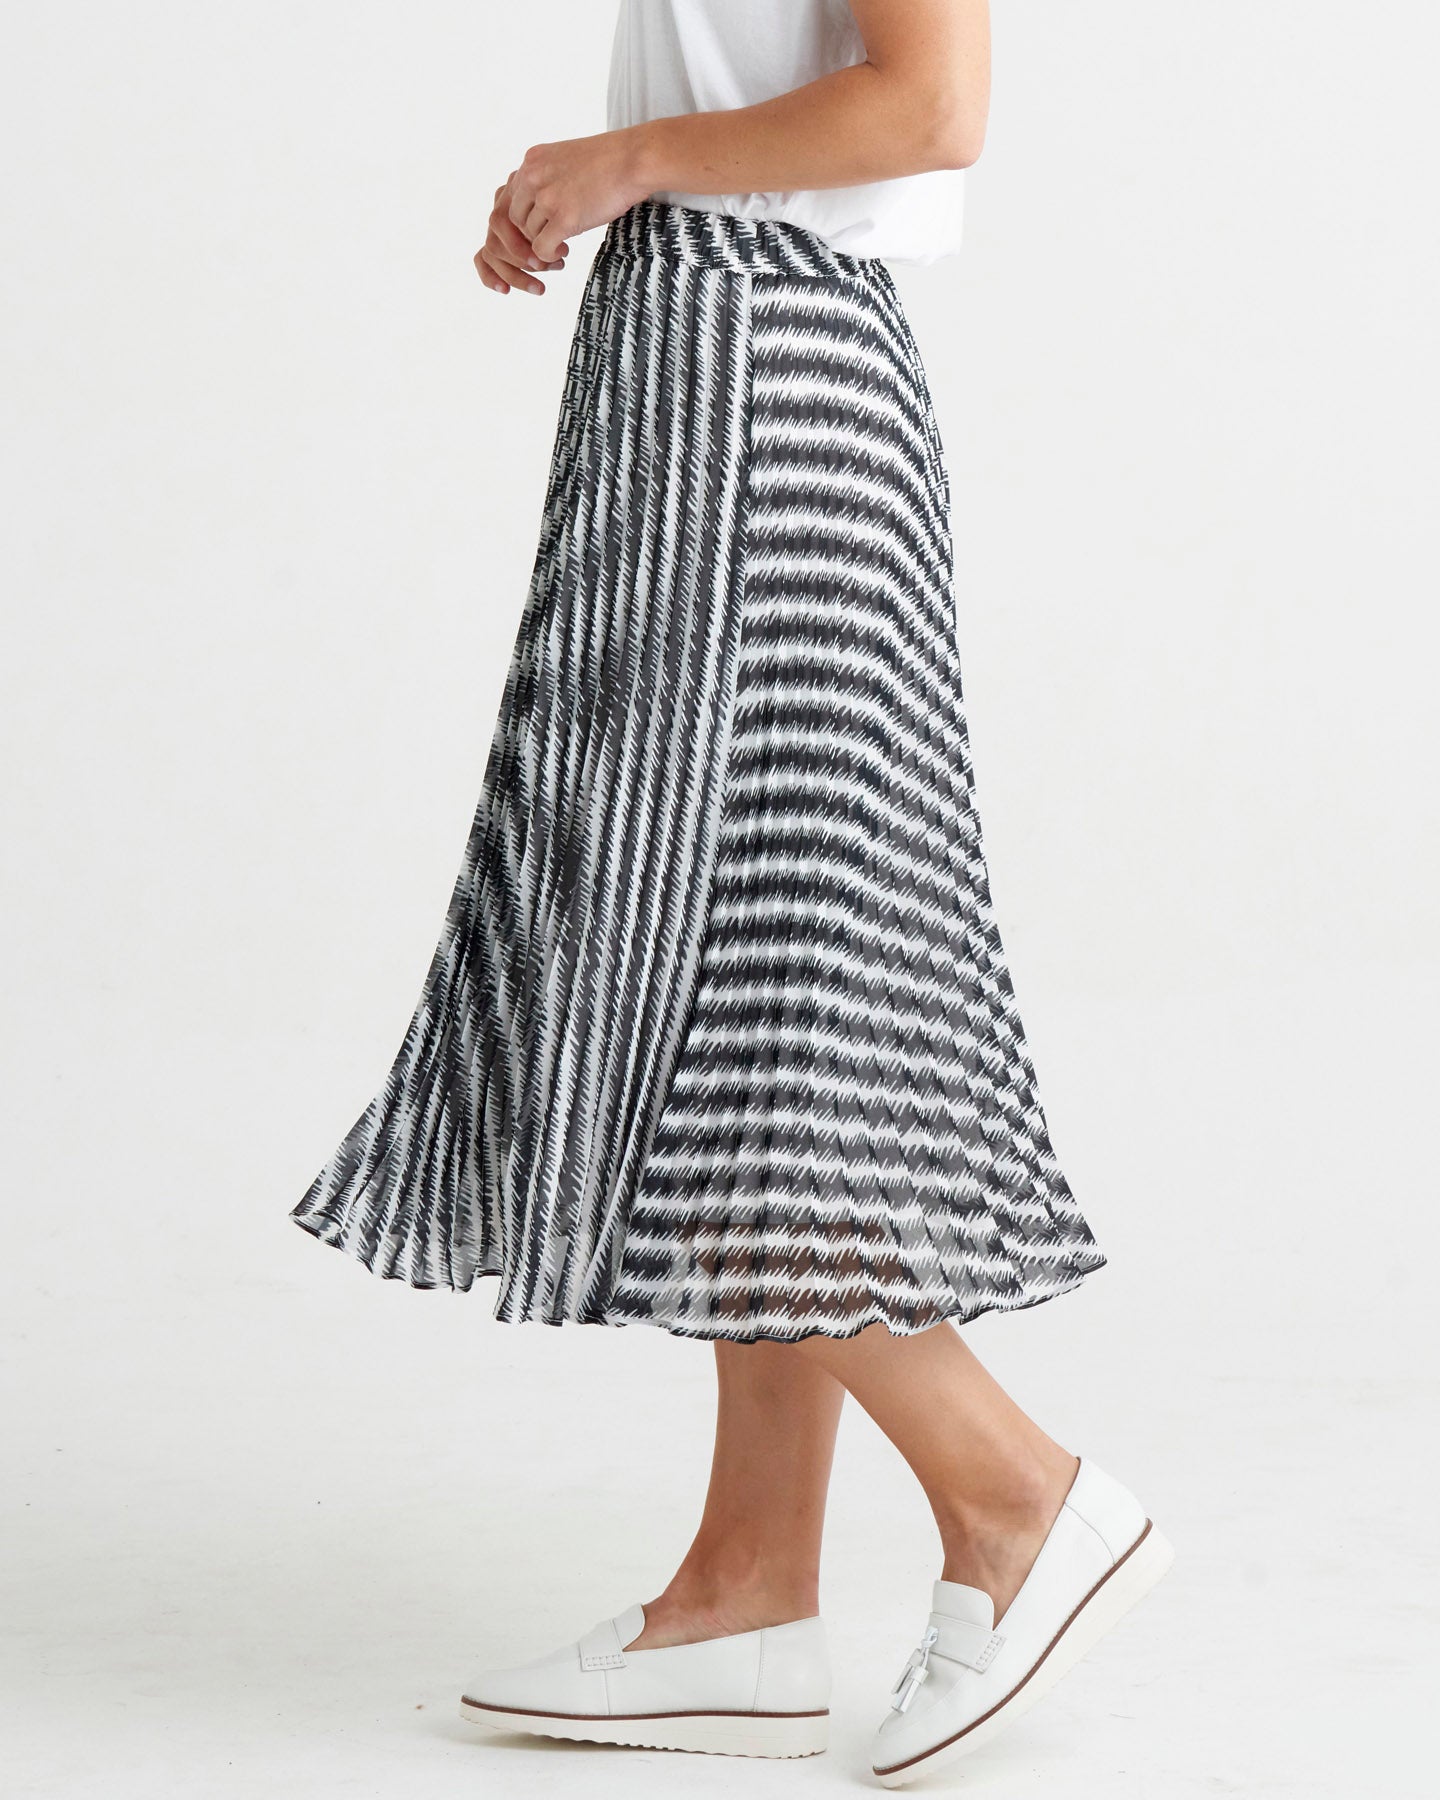 Chanel Pleated Skirt